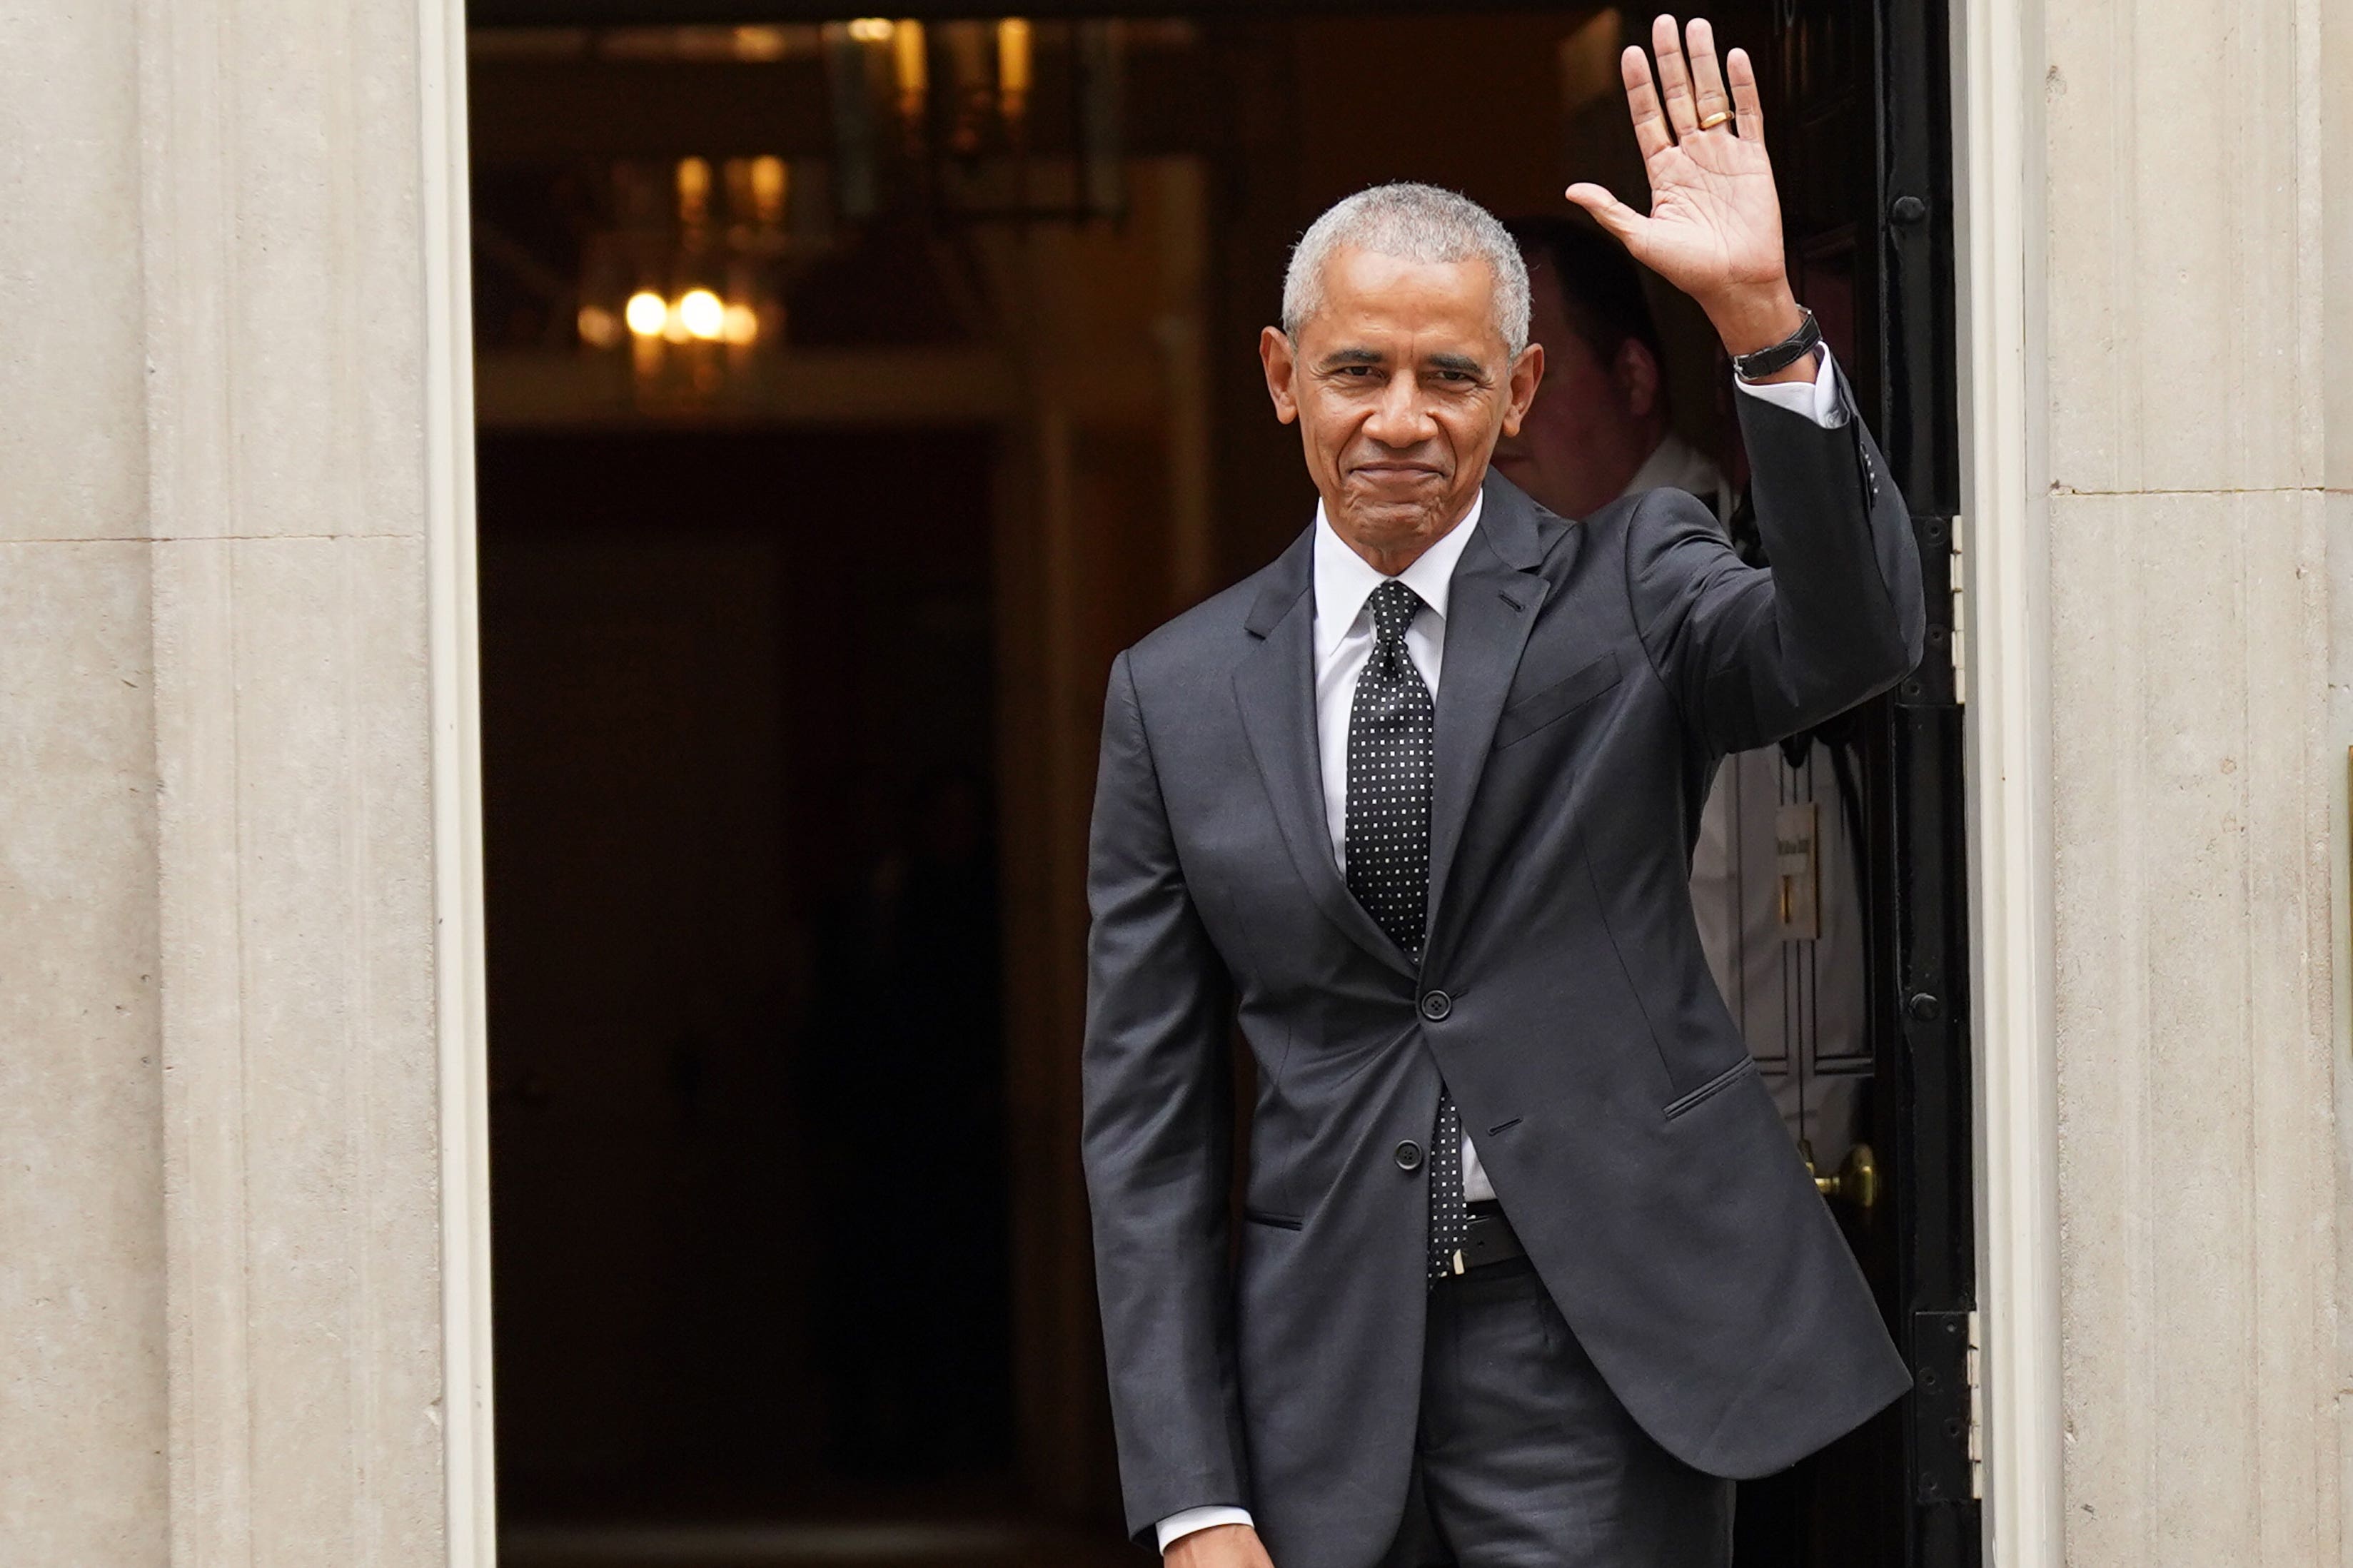 Barack Obama visited the prime minister in No 10 for around an hour